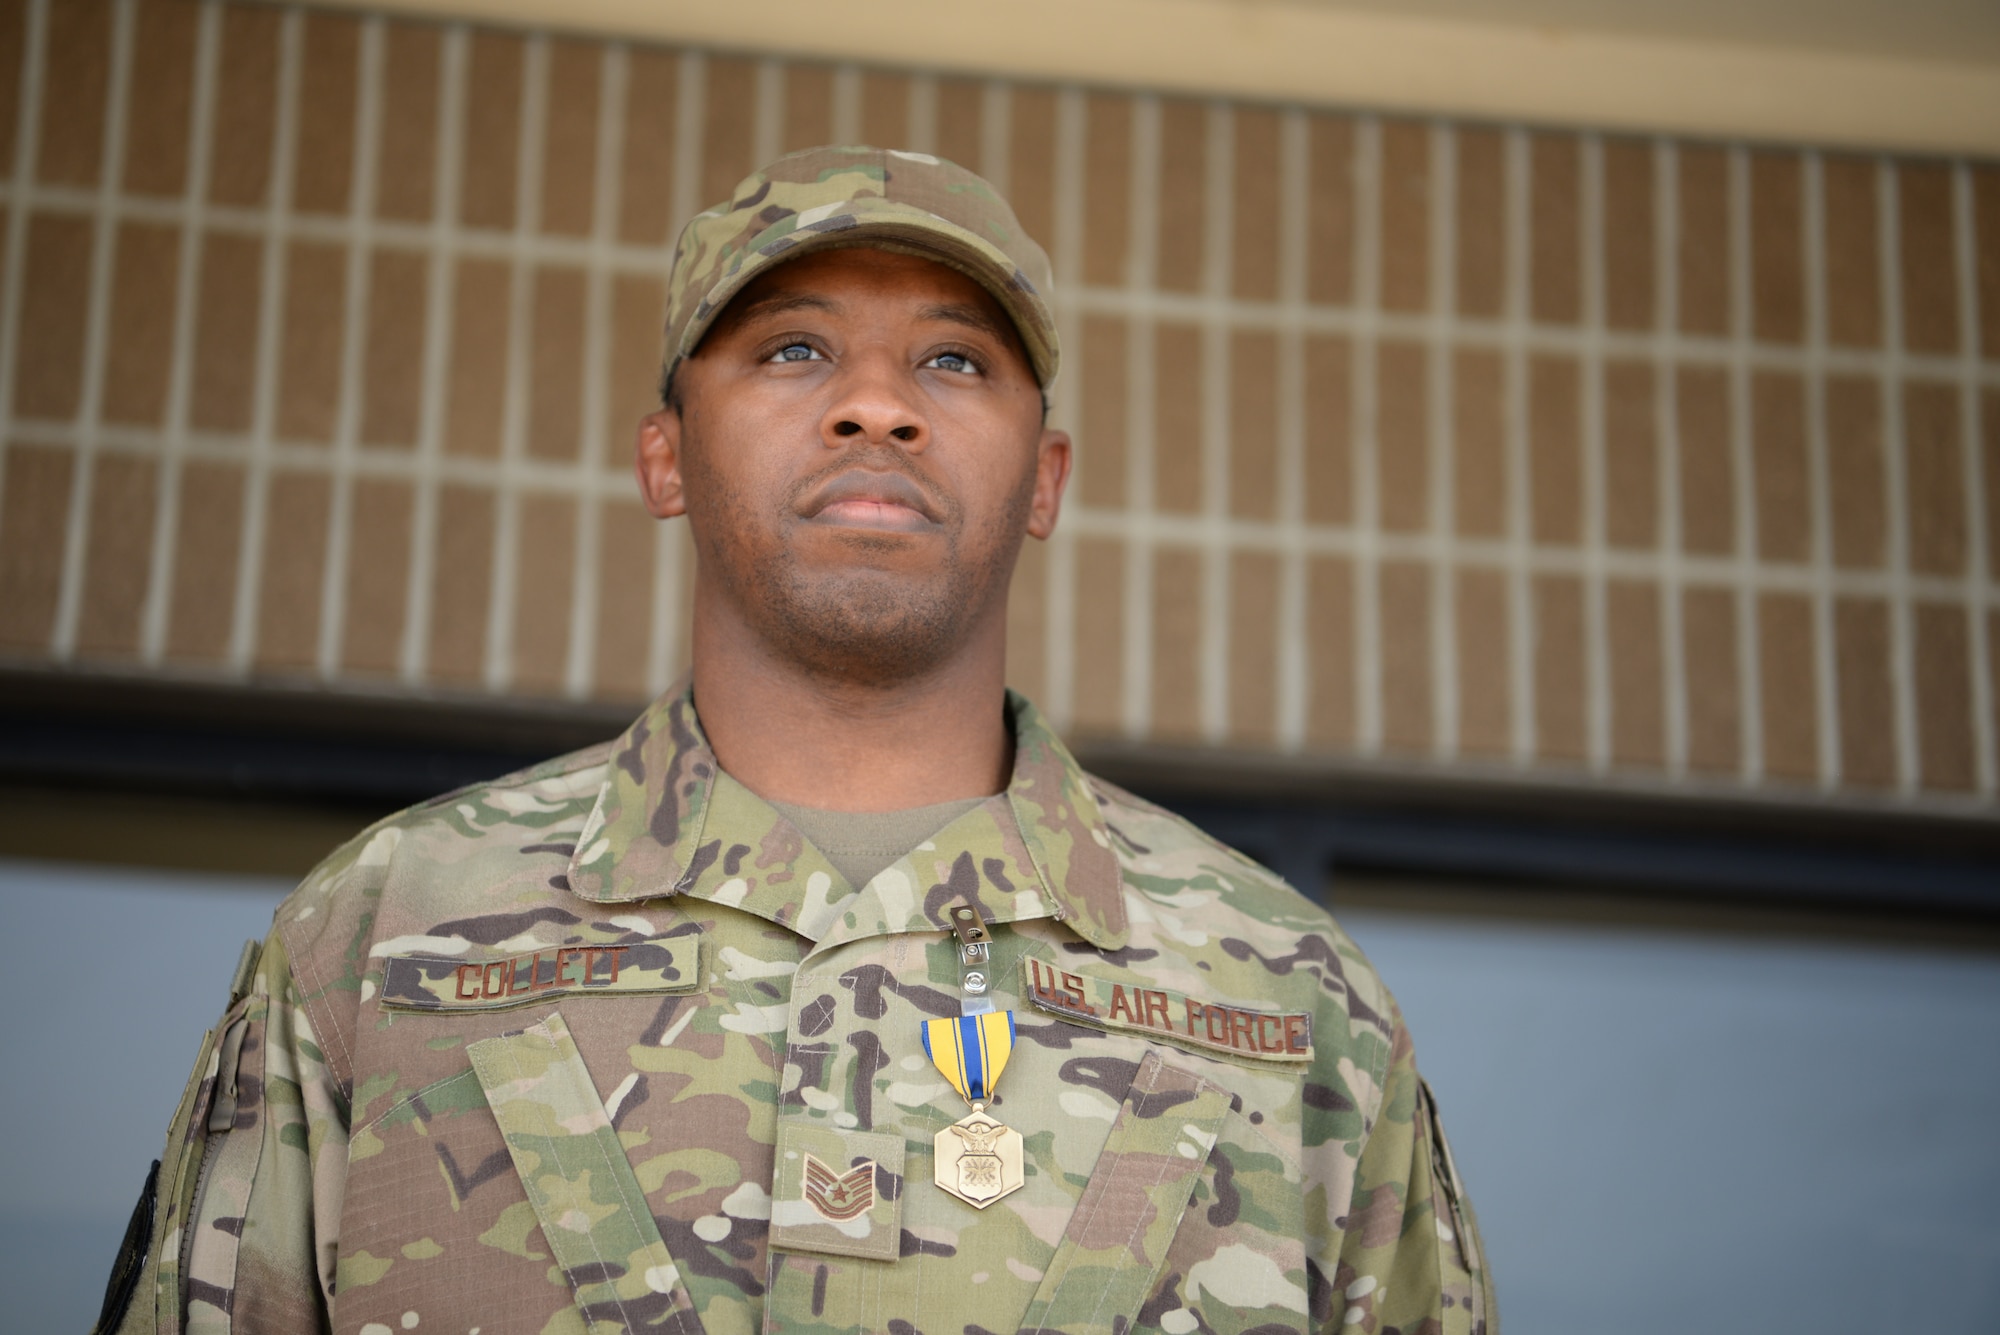 U.S. Air Force Tech. Sgt. Jonathan Collett, 336th Training Squadron cyber surety student, stands after being awarded an Air Force Commedation Medal outside the Levitow Training Support Facillity on Keesler Air Force Base, Mississippi, June 27, 2019. A ceremony was held for Collett due to his heroic actions after rescuing Dennis Boney, Harrison County Police Department deputy. (U.S Air Force photo by Airman 1st Class Spencer Tobler)